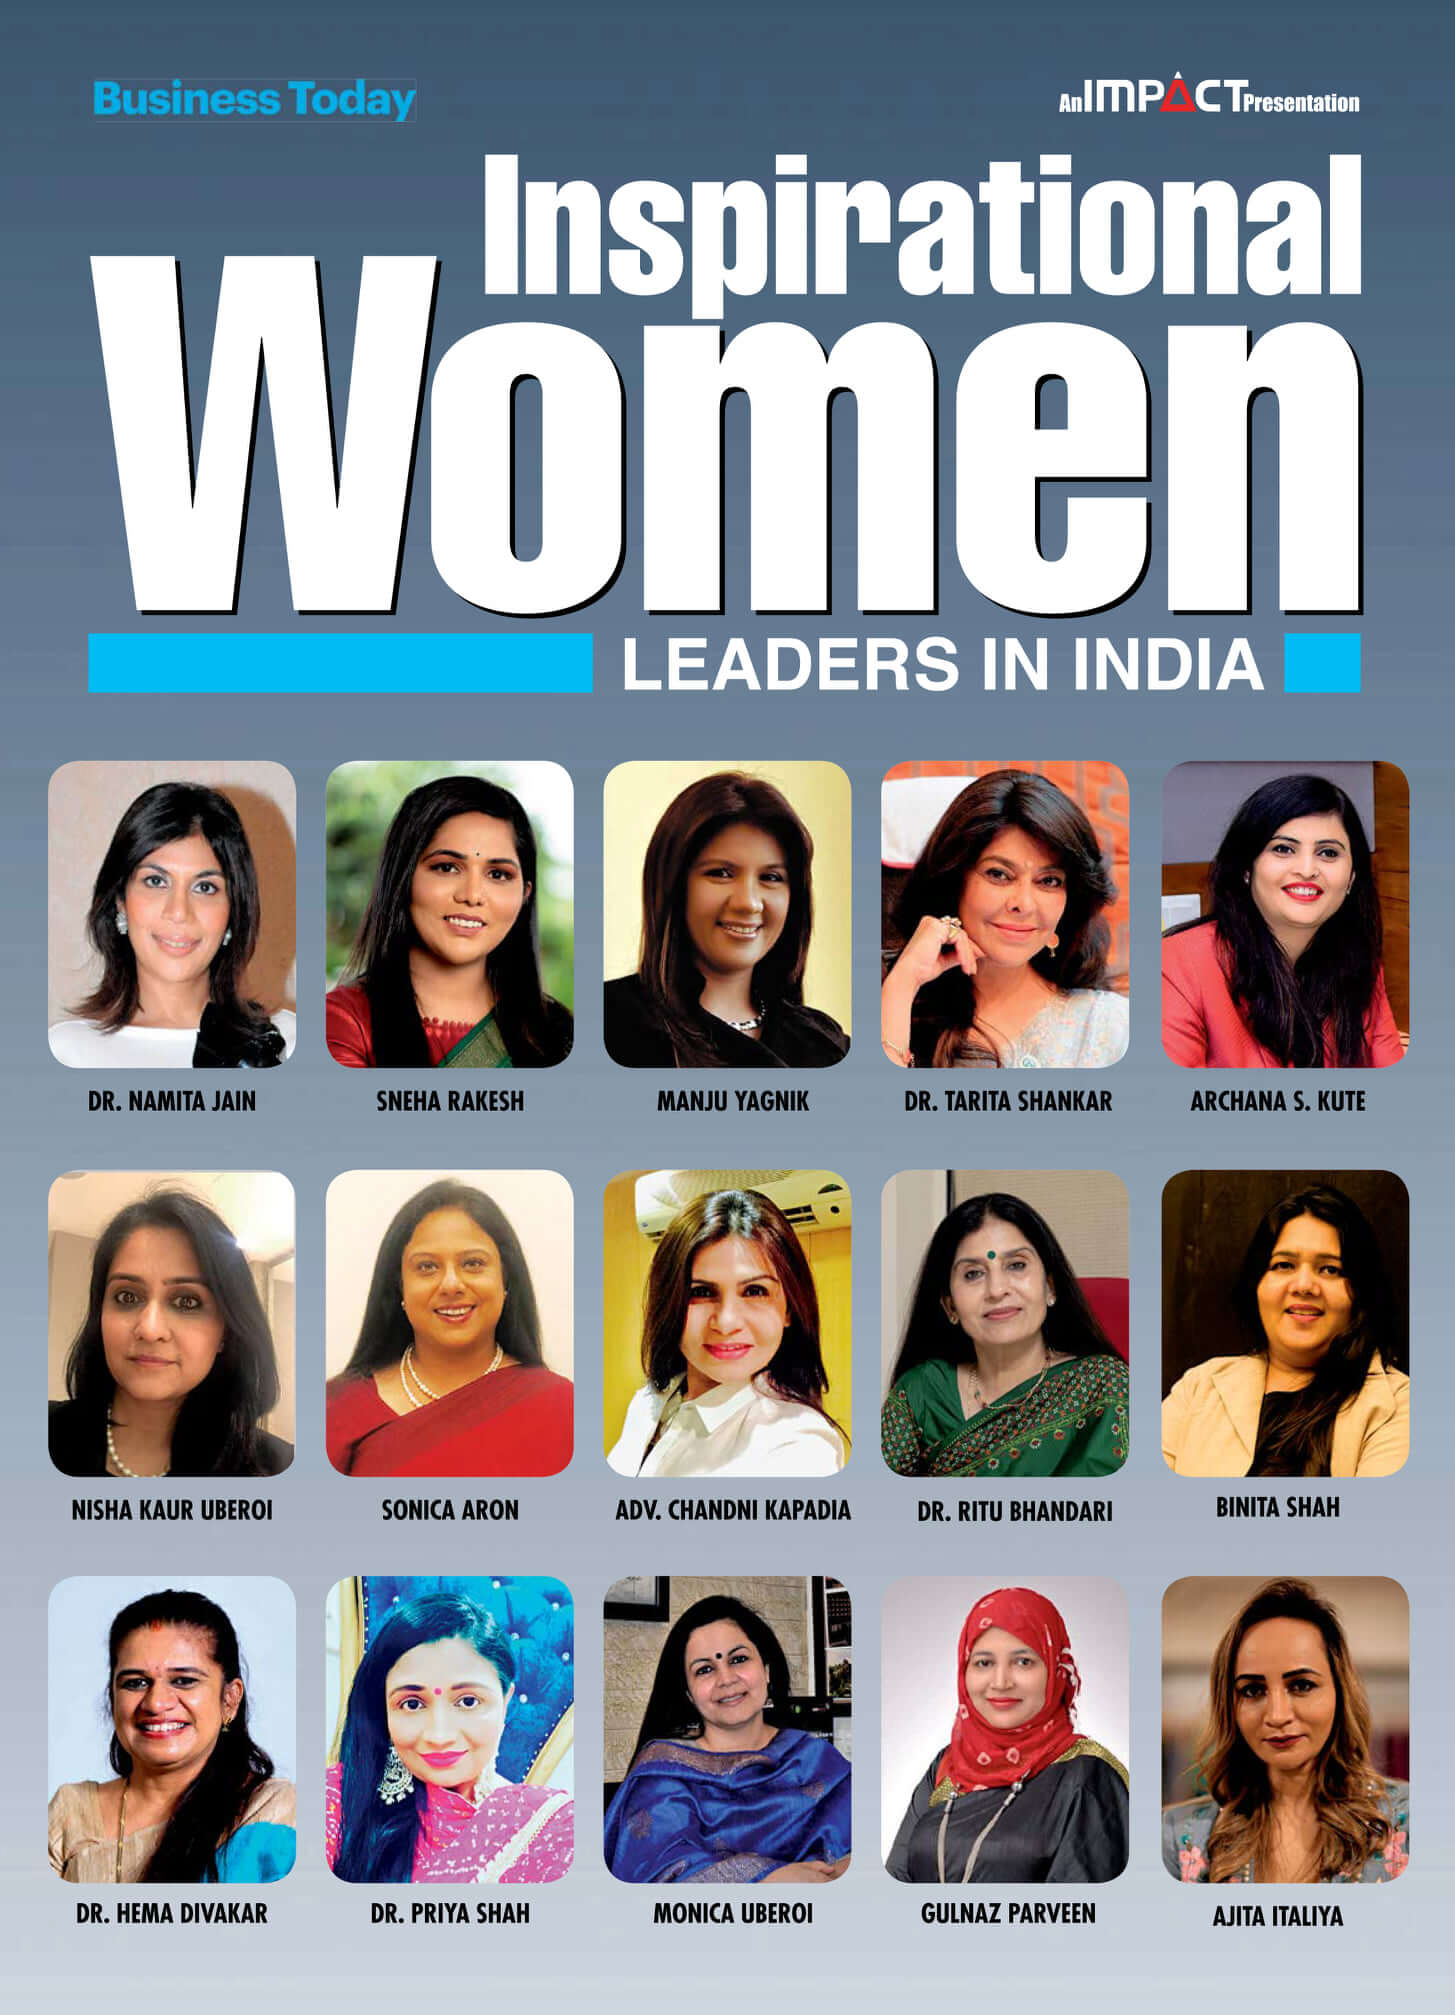 Mrs. Archana Suresh Kute among the Inspirational Women Leaders In India, 2021 by Business Today